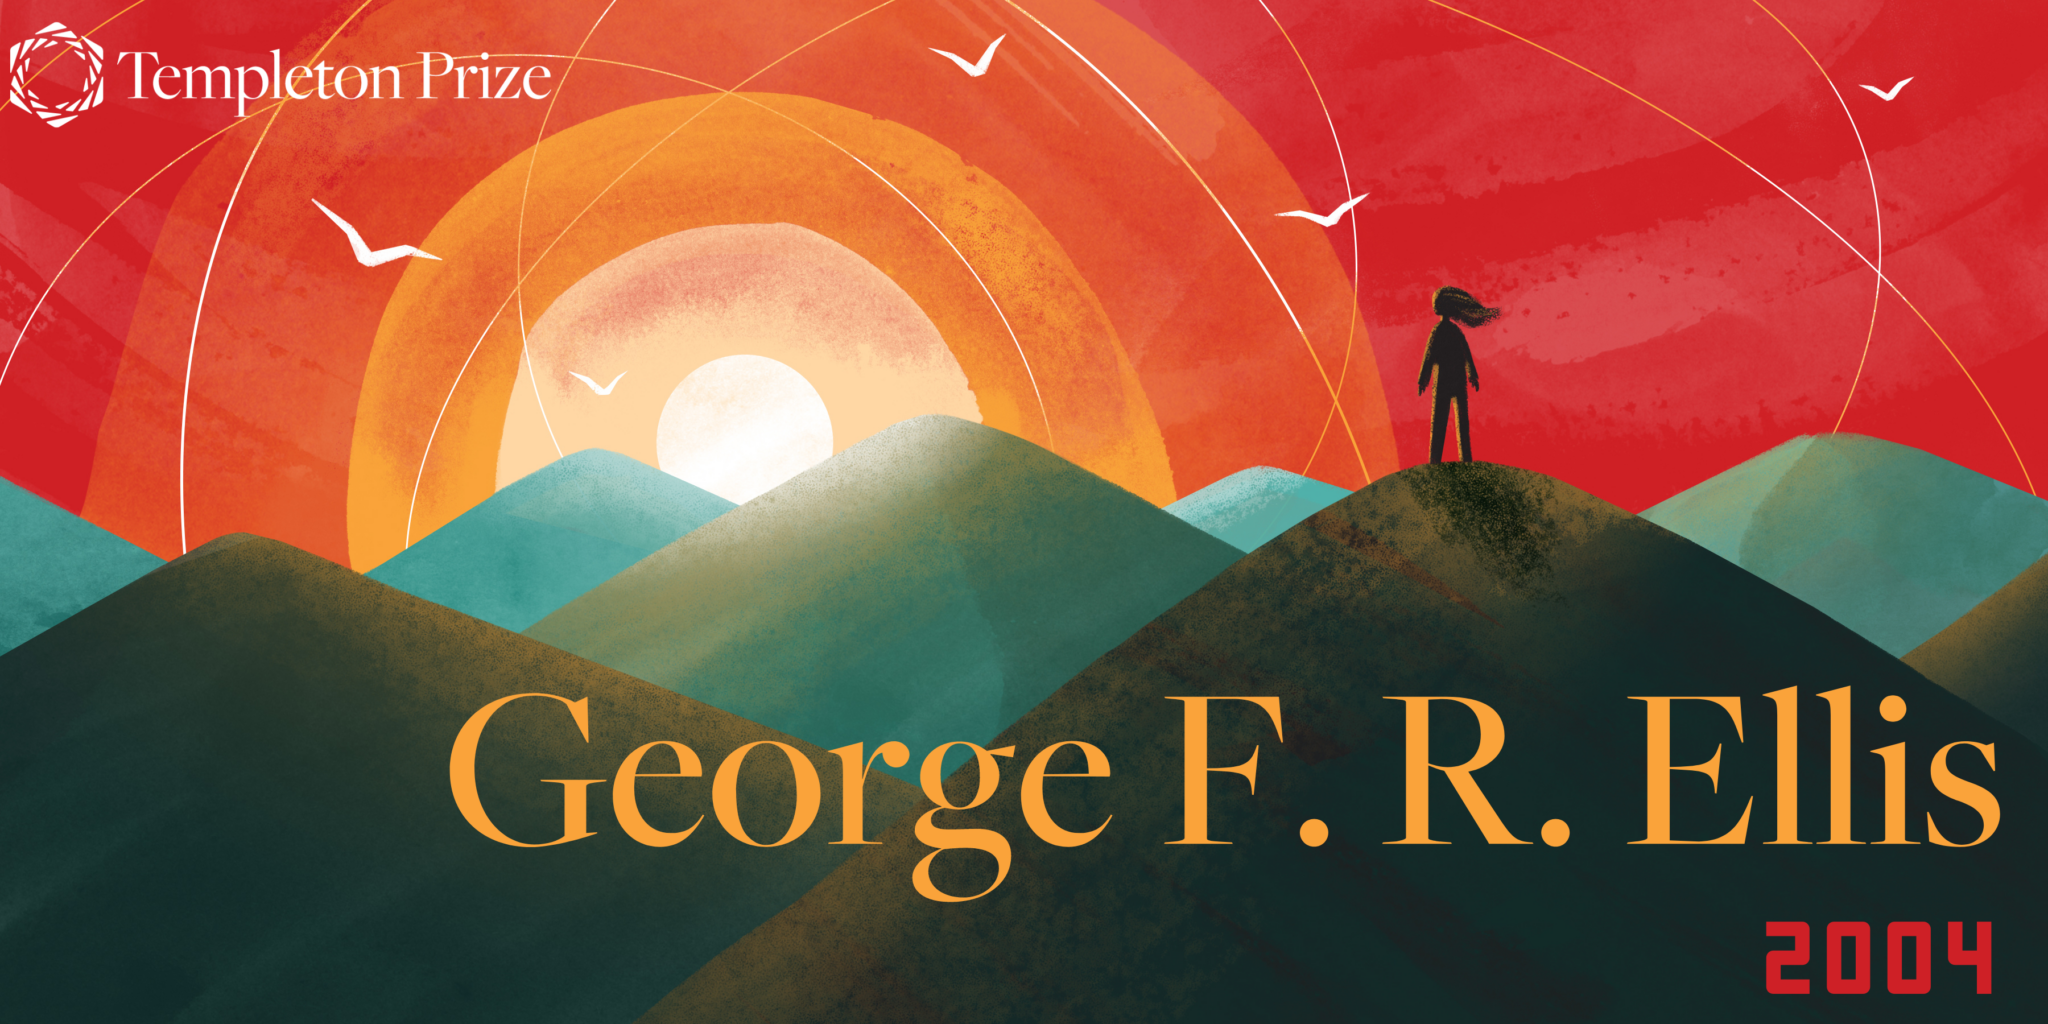 George F. R. Ellis: Exploring the Cosmos and the Essence of Being